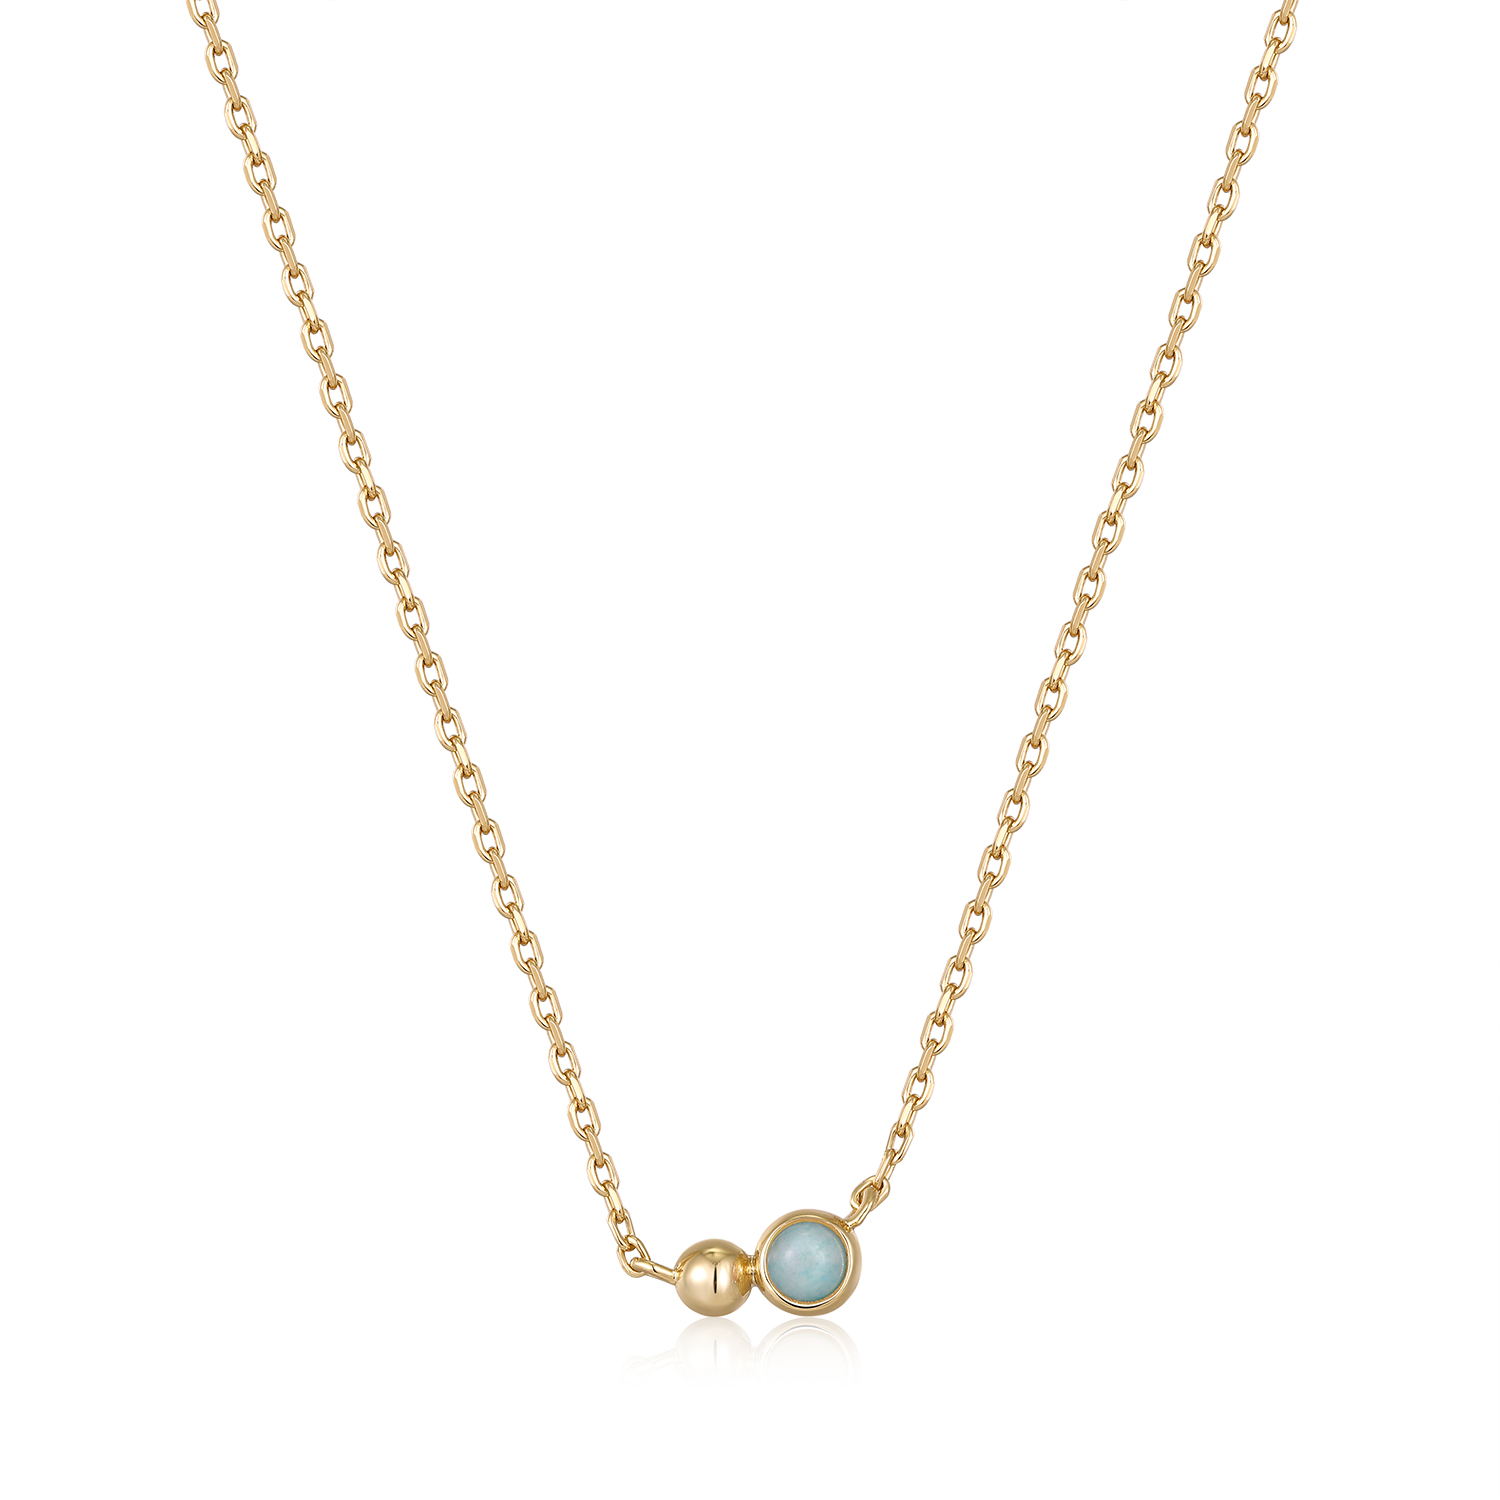 ANIA HAIE Orb Amazonite Pendant Necklace, Gold-plated